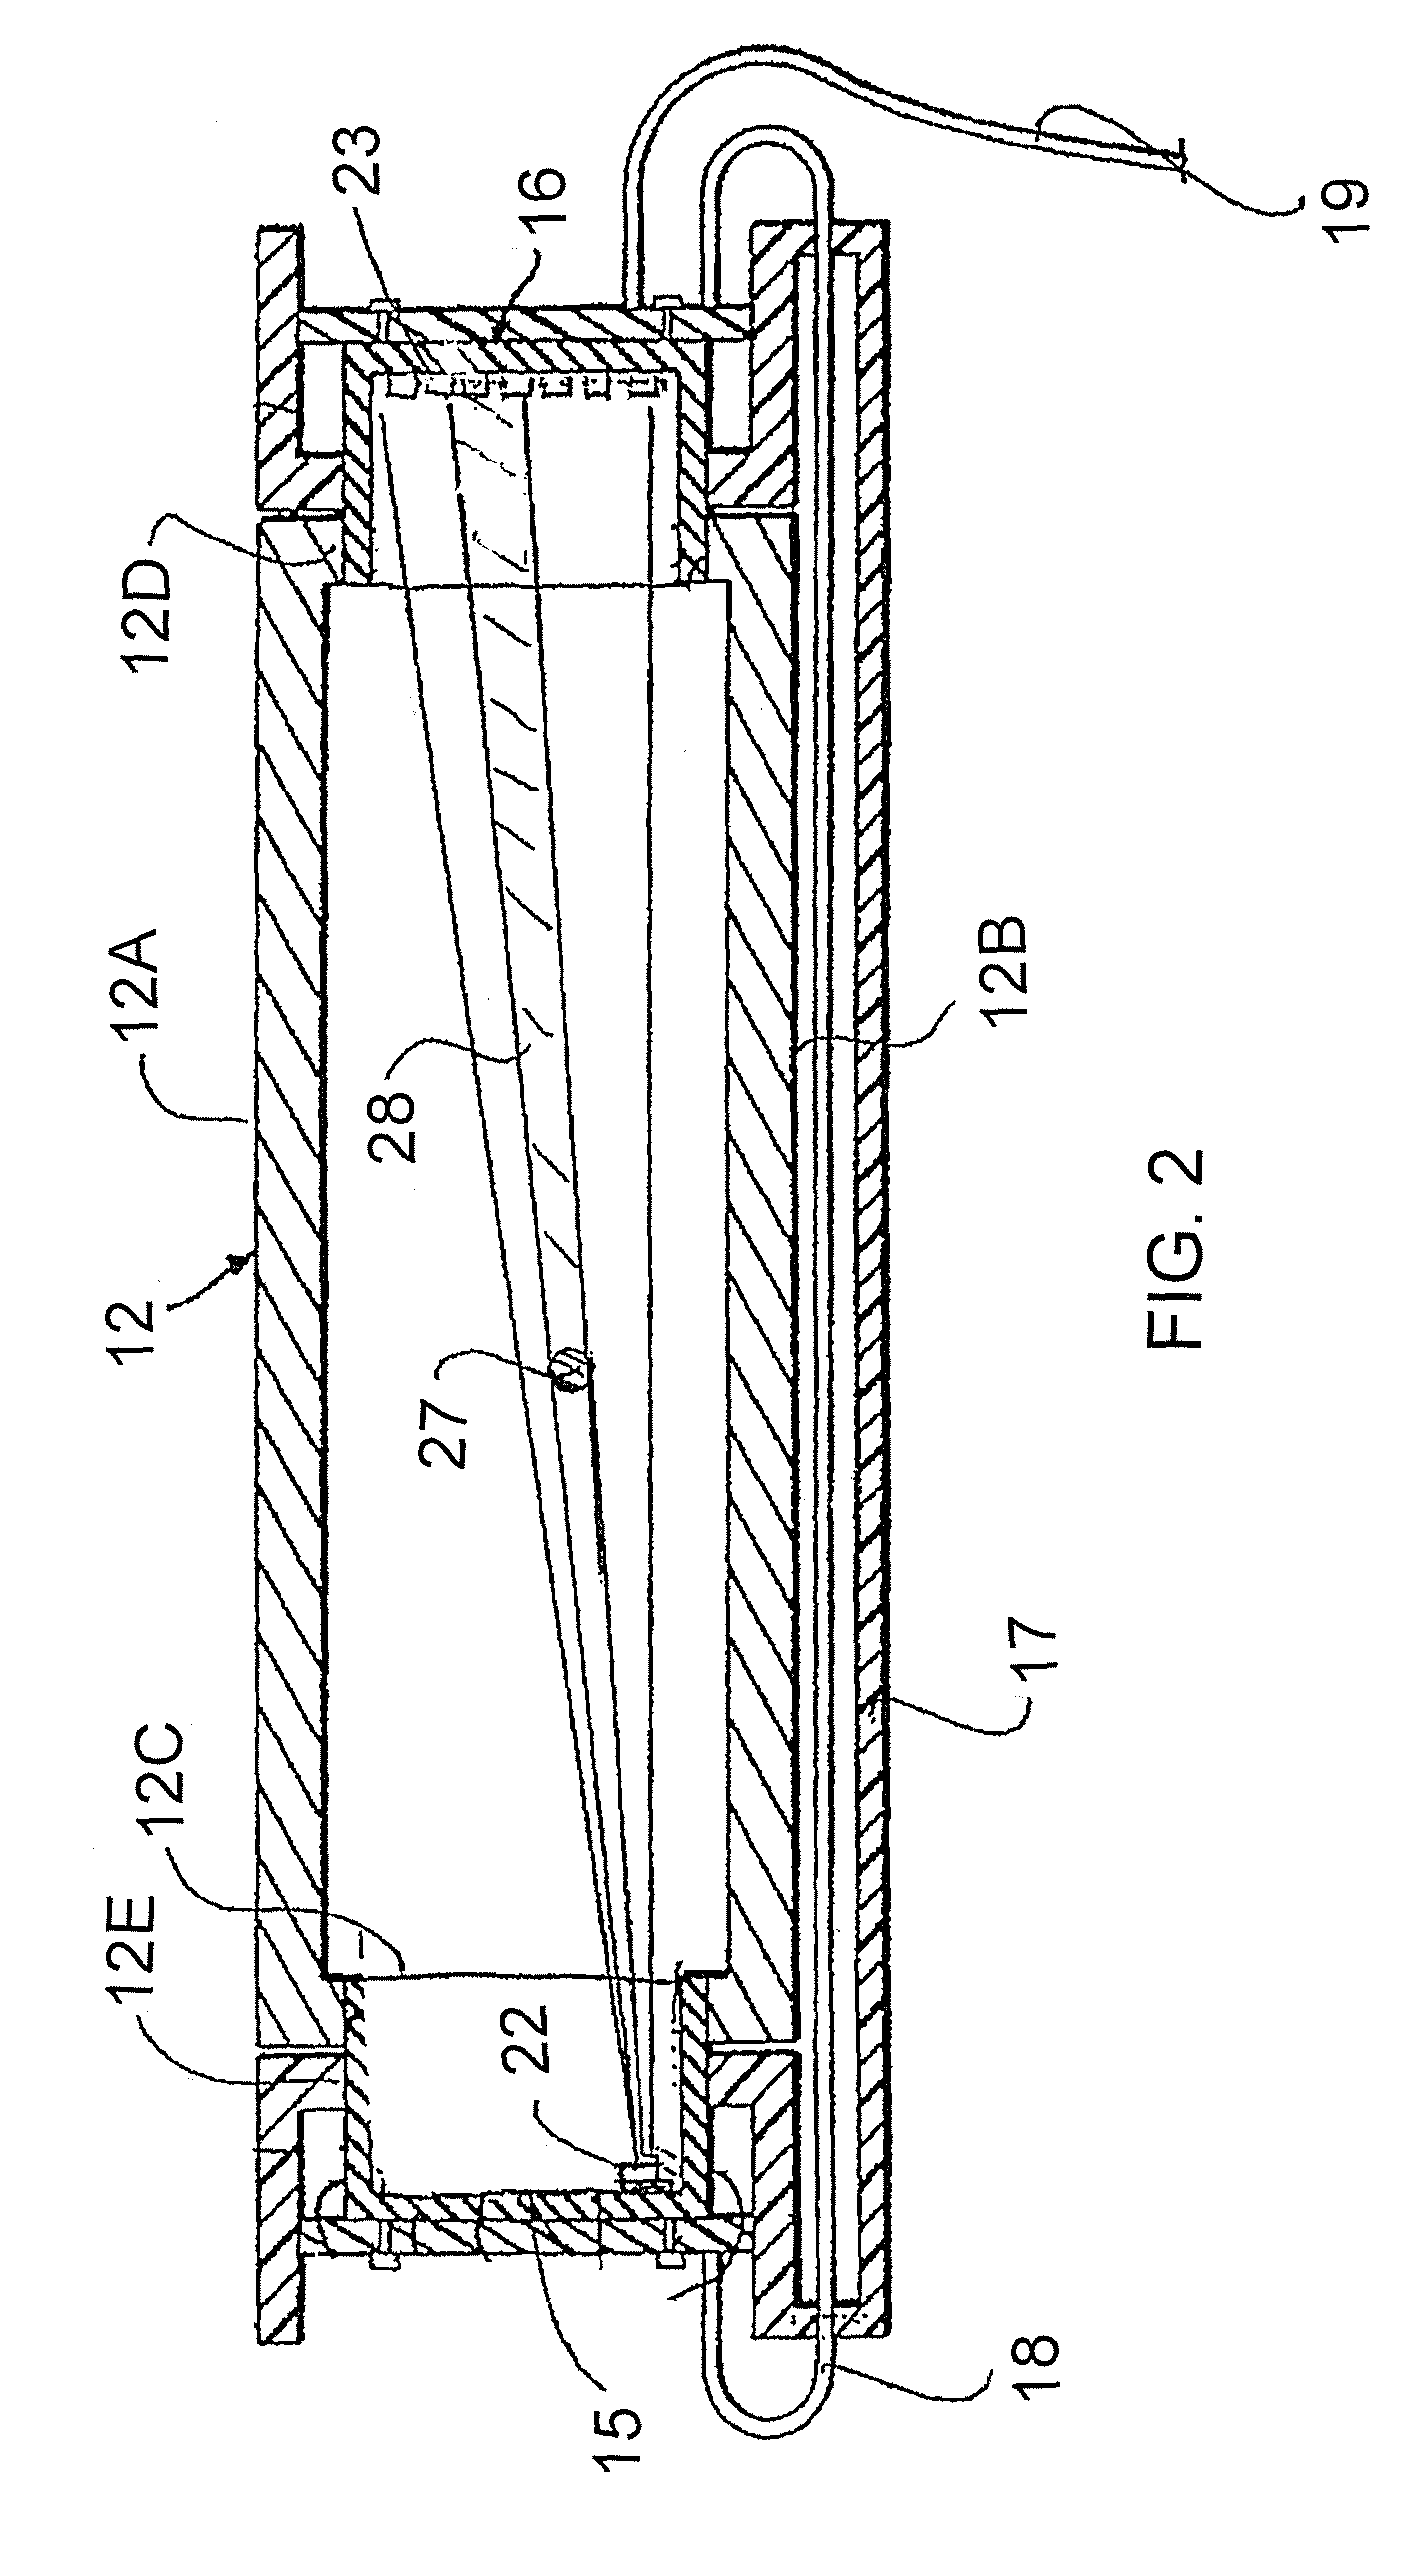 Arrangement of sensors in a seed counting apparatus for a planter monitor